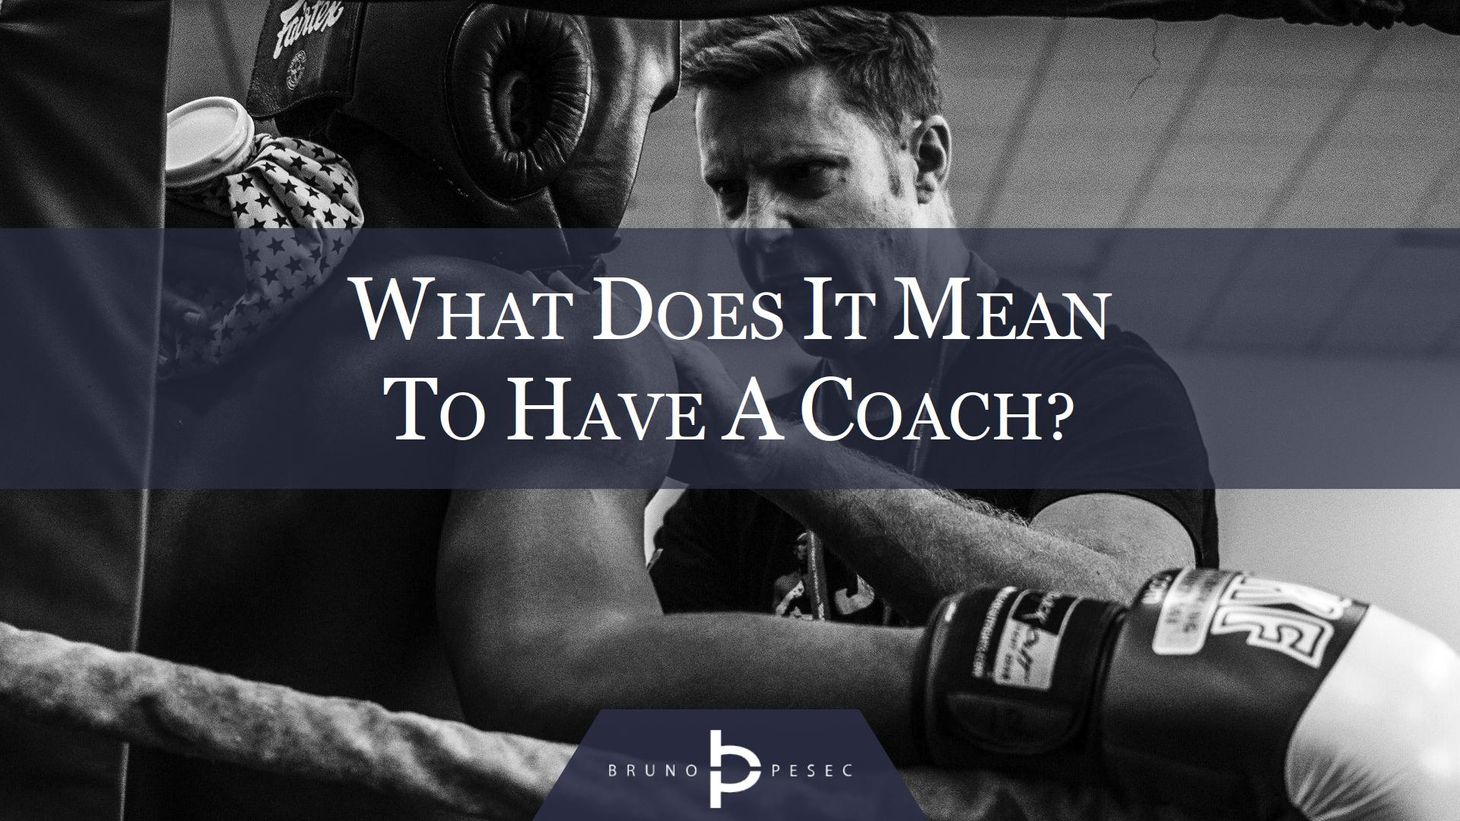 What does it mean to have a coach?